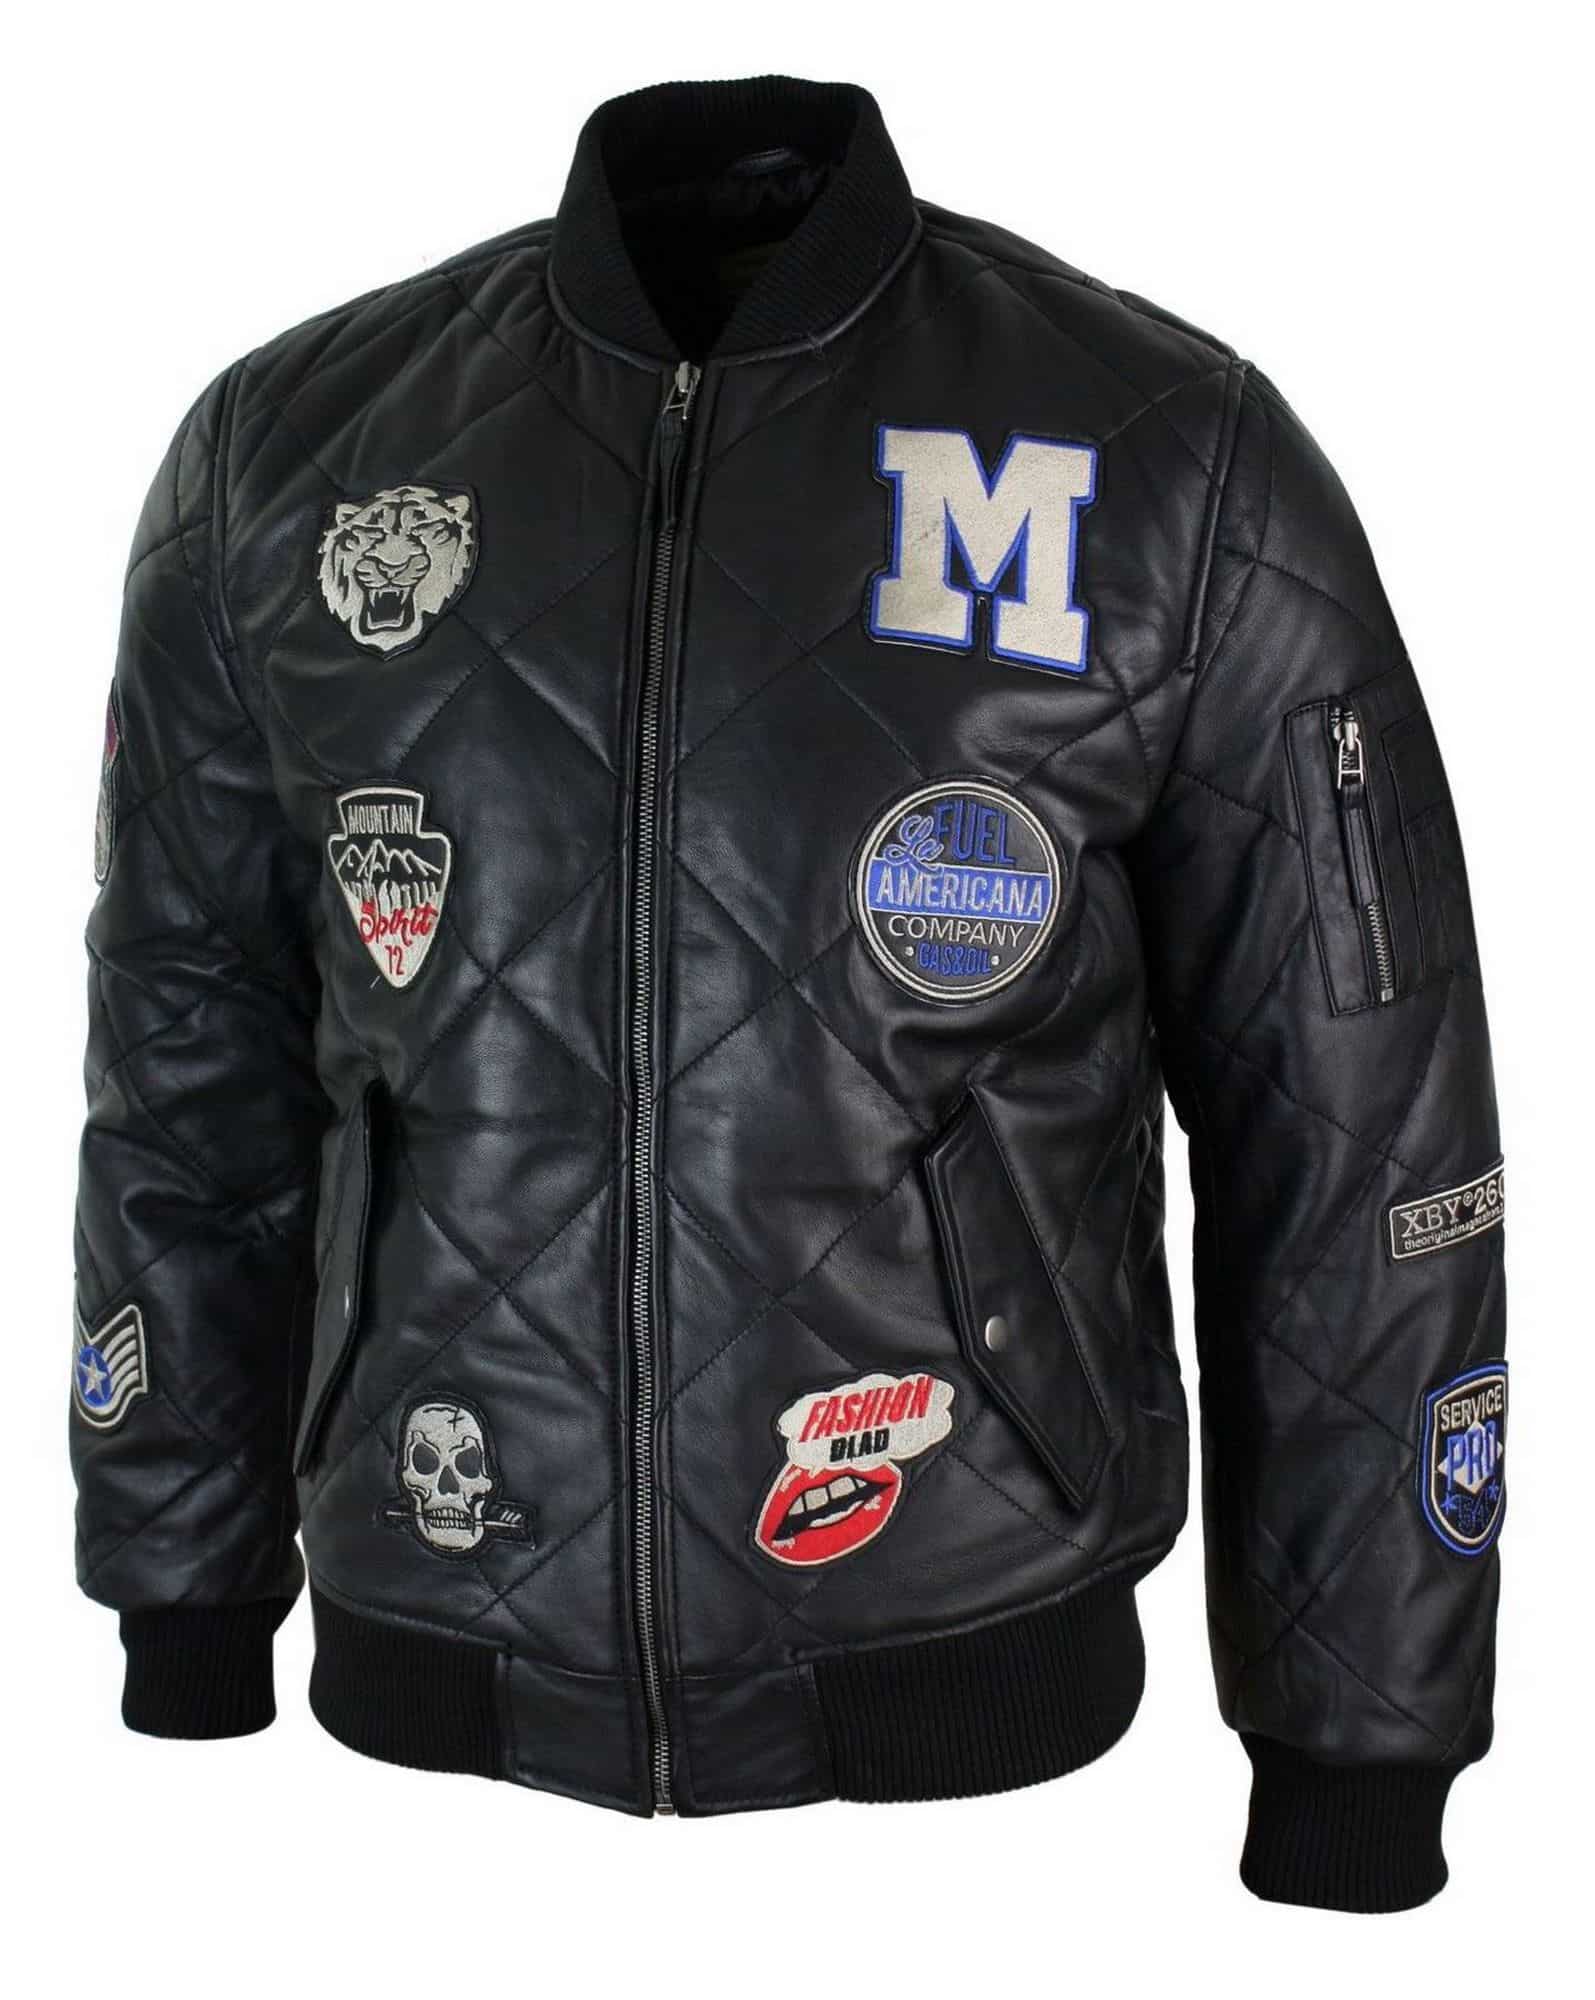 Mens Black and Grey Varsity Jacket - Letterman Bomber Style In Canada